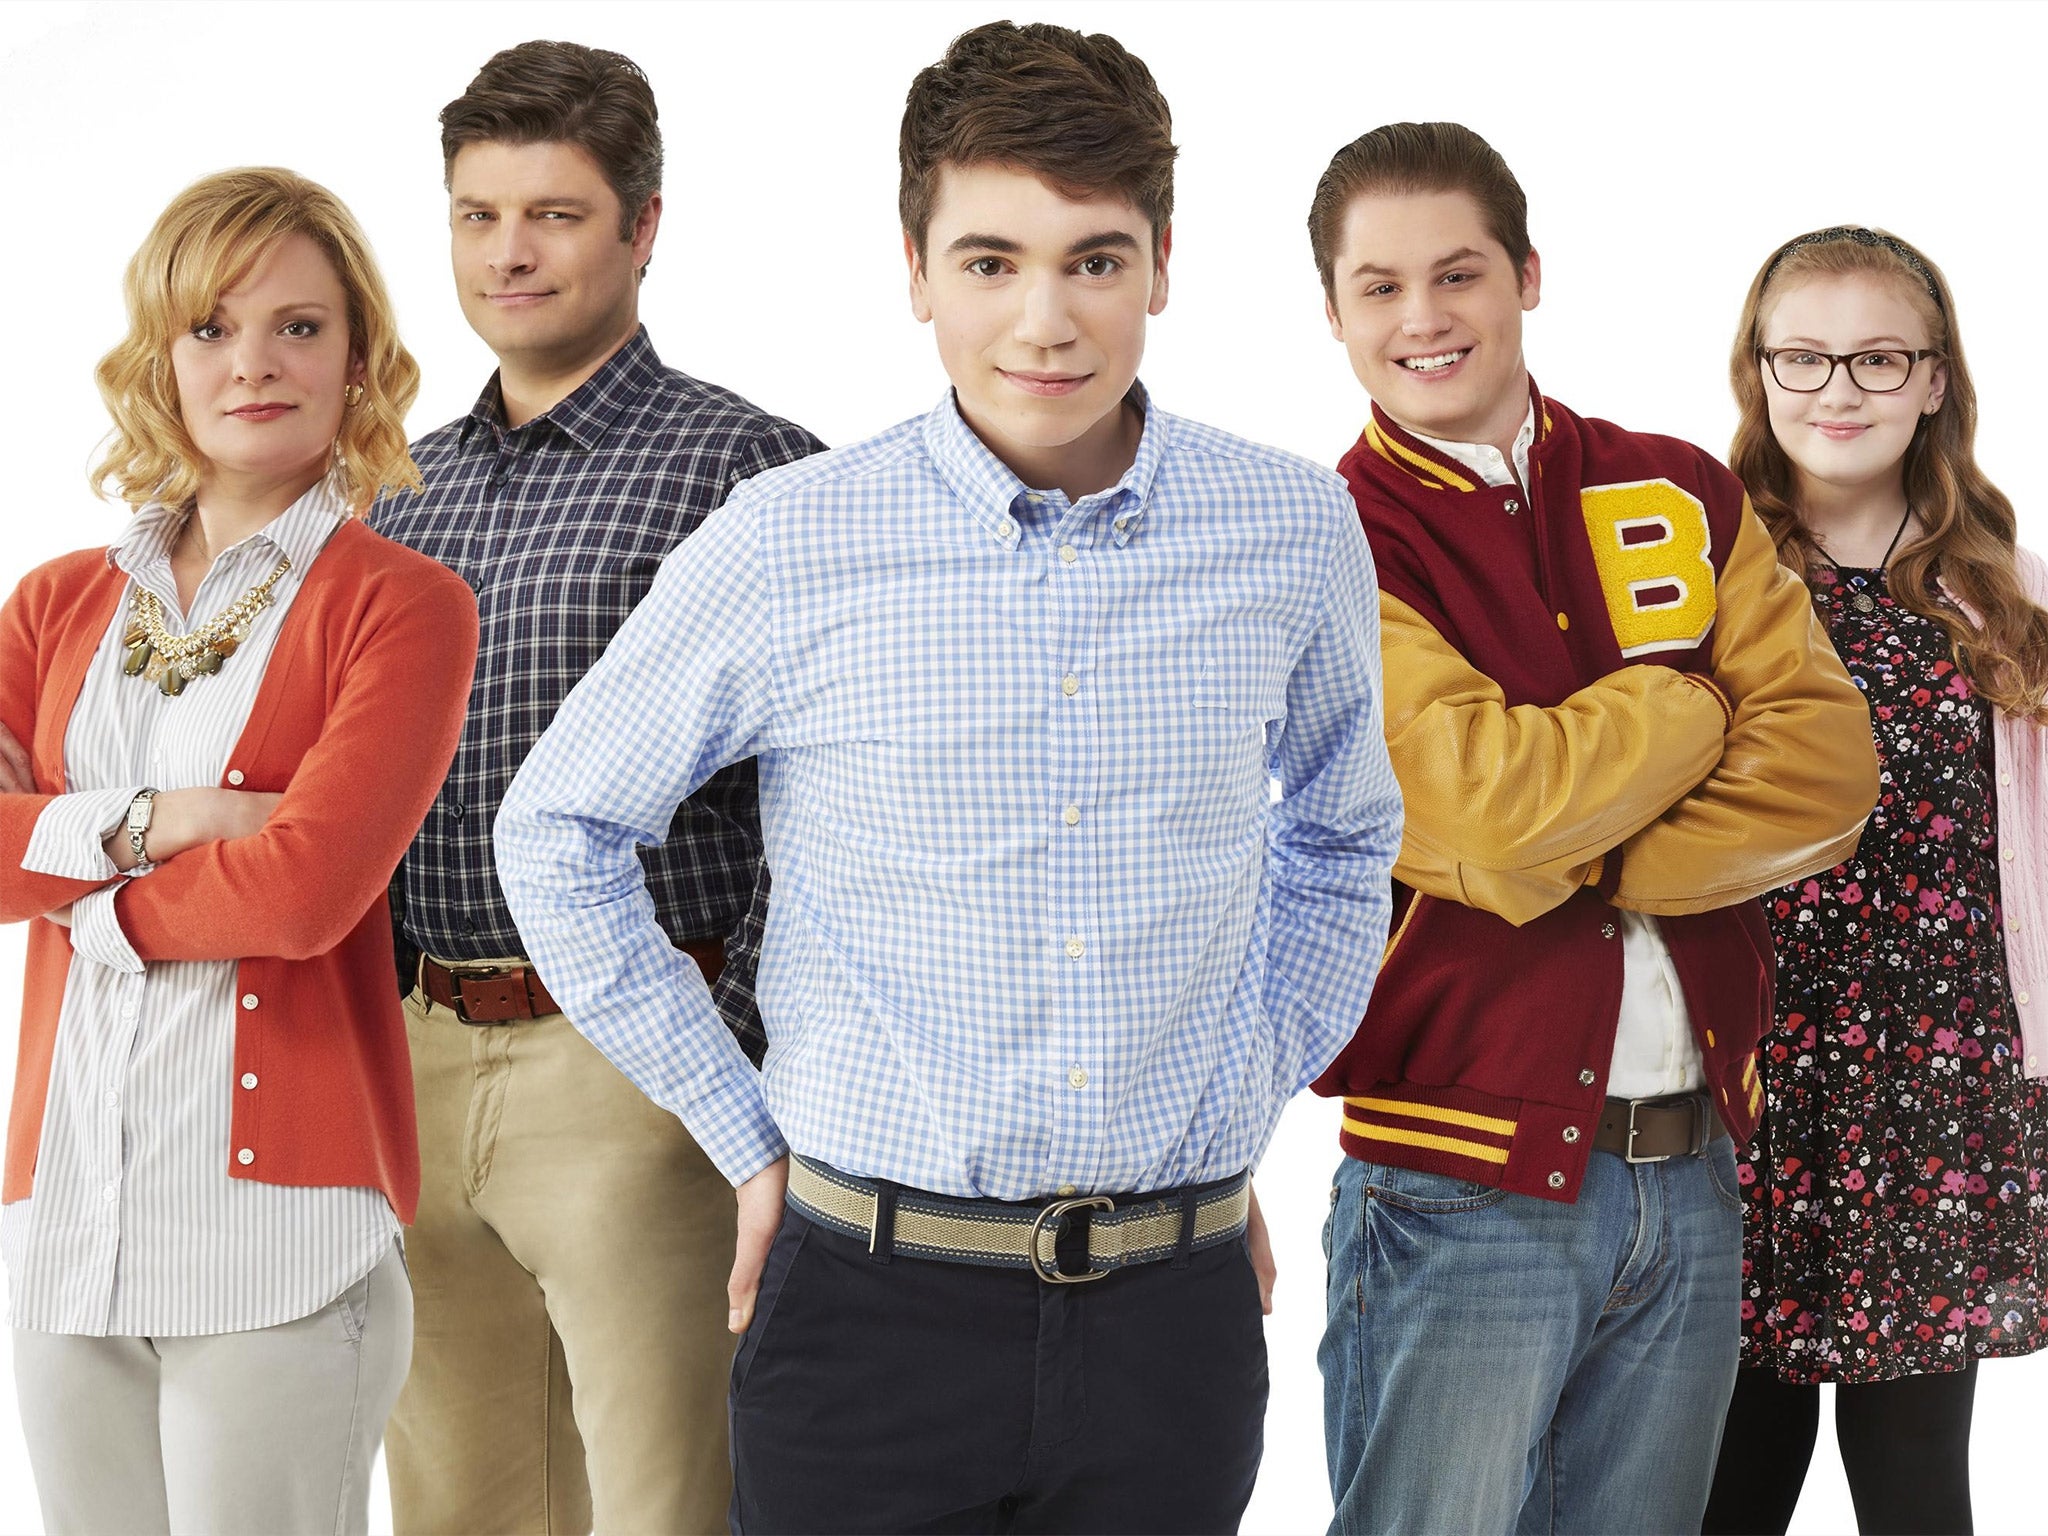 'The Real O’Neals', ABC's new sitcom about a gay teenager and his Catholic family